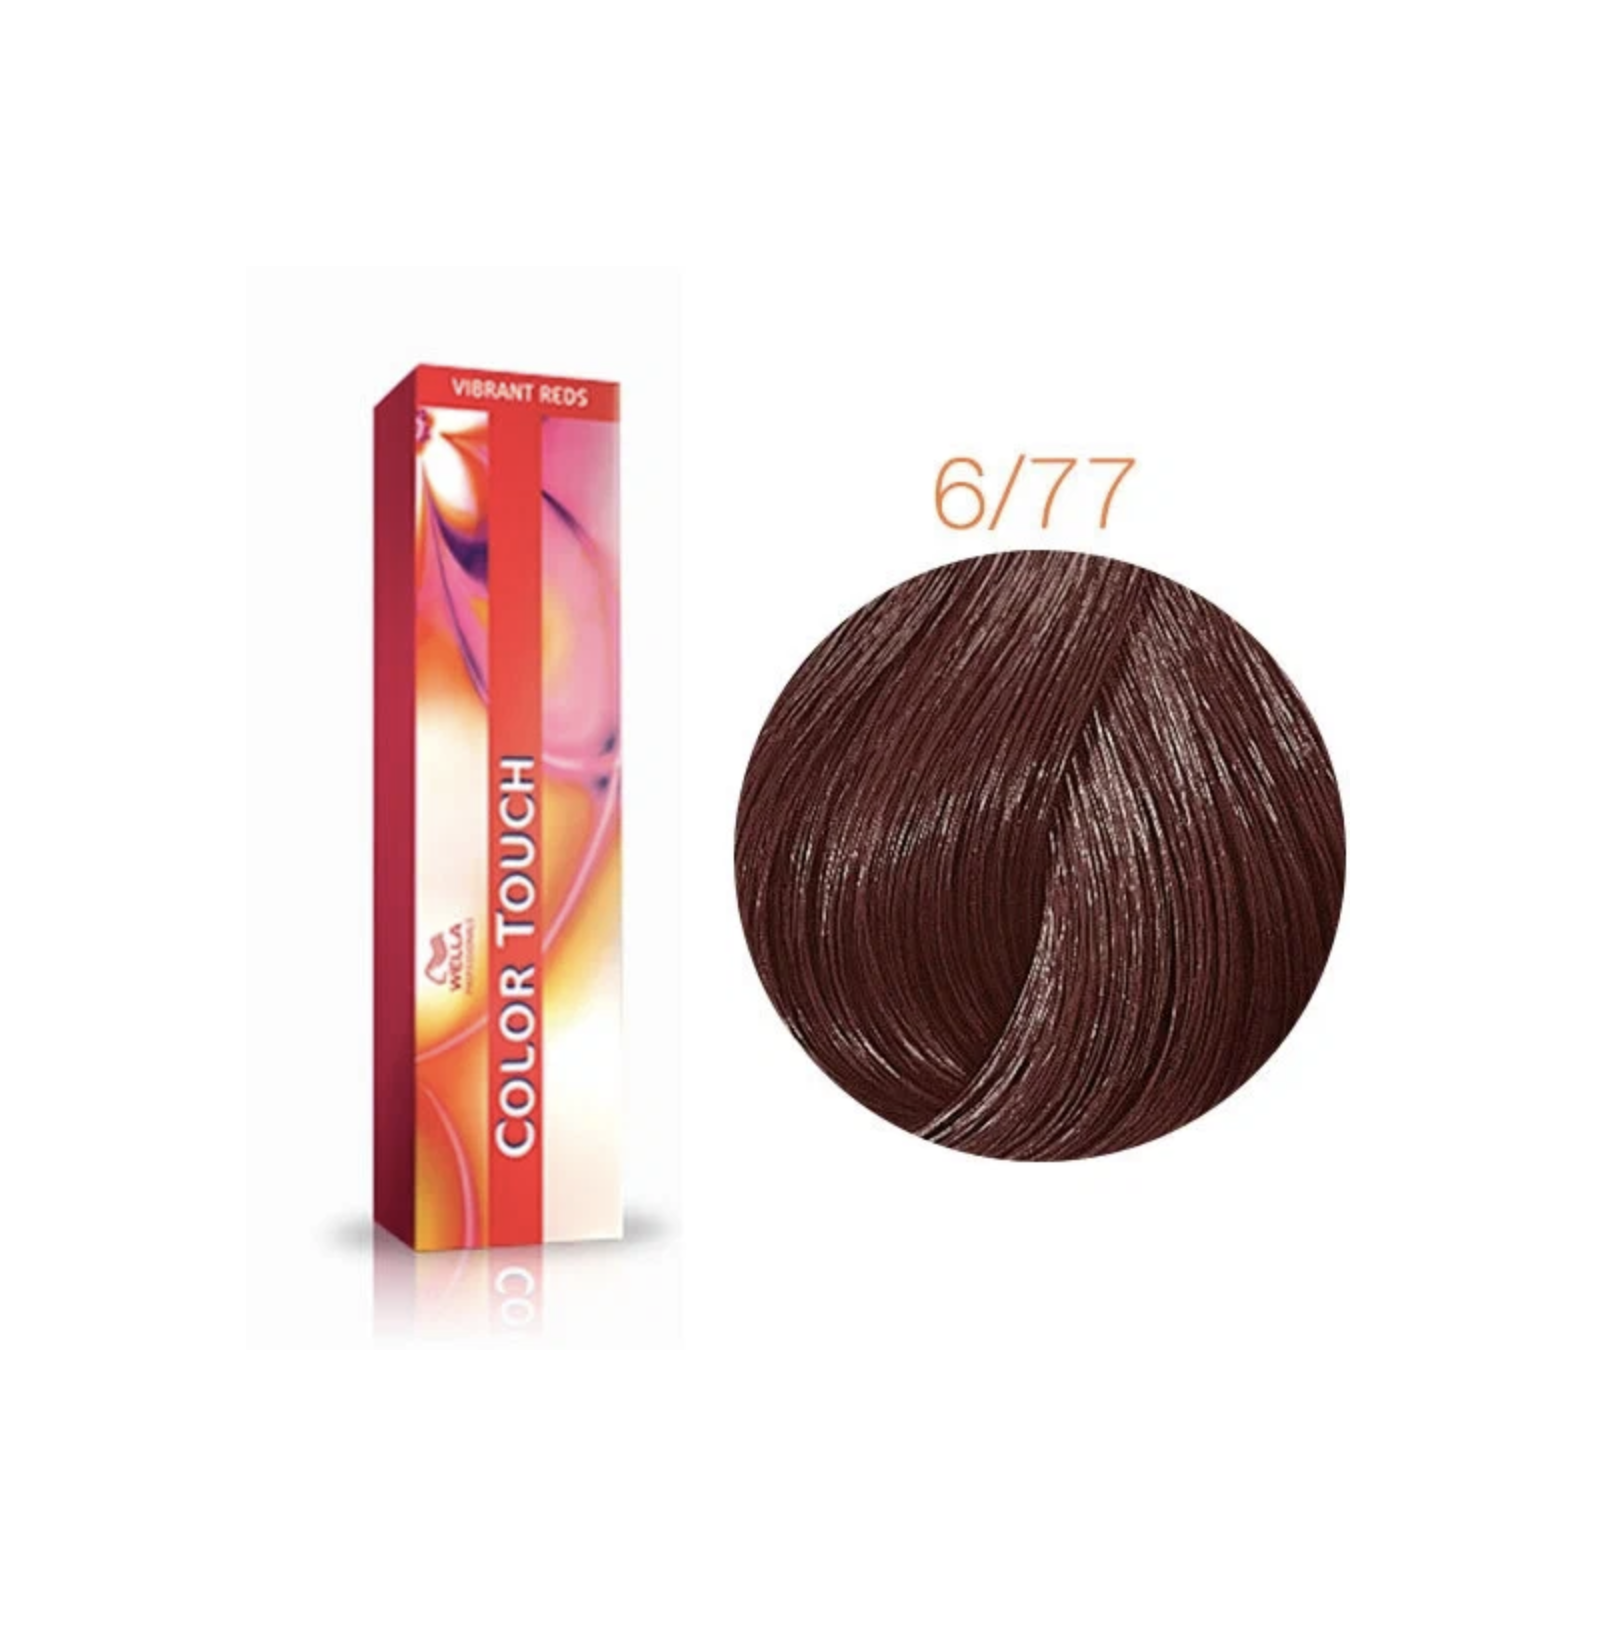   / Wella Color Touch - -    6/77    60 